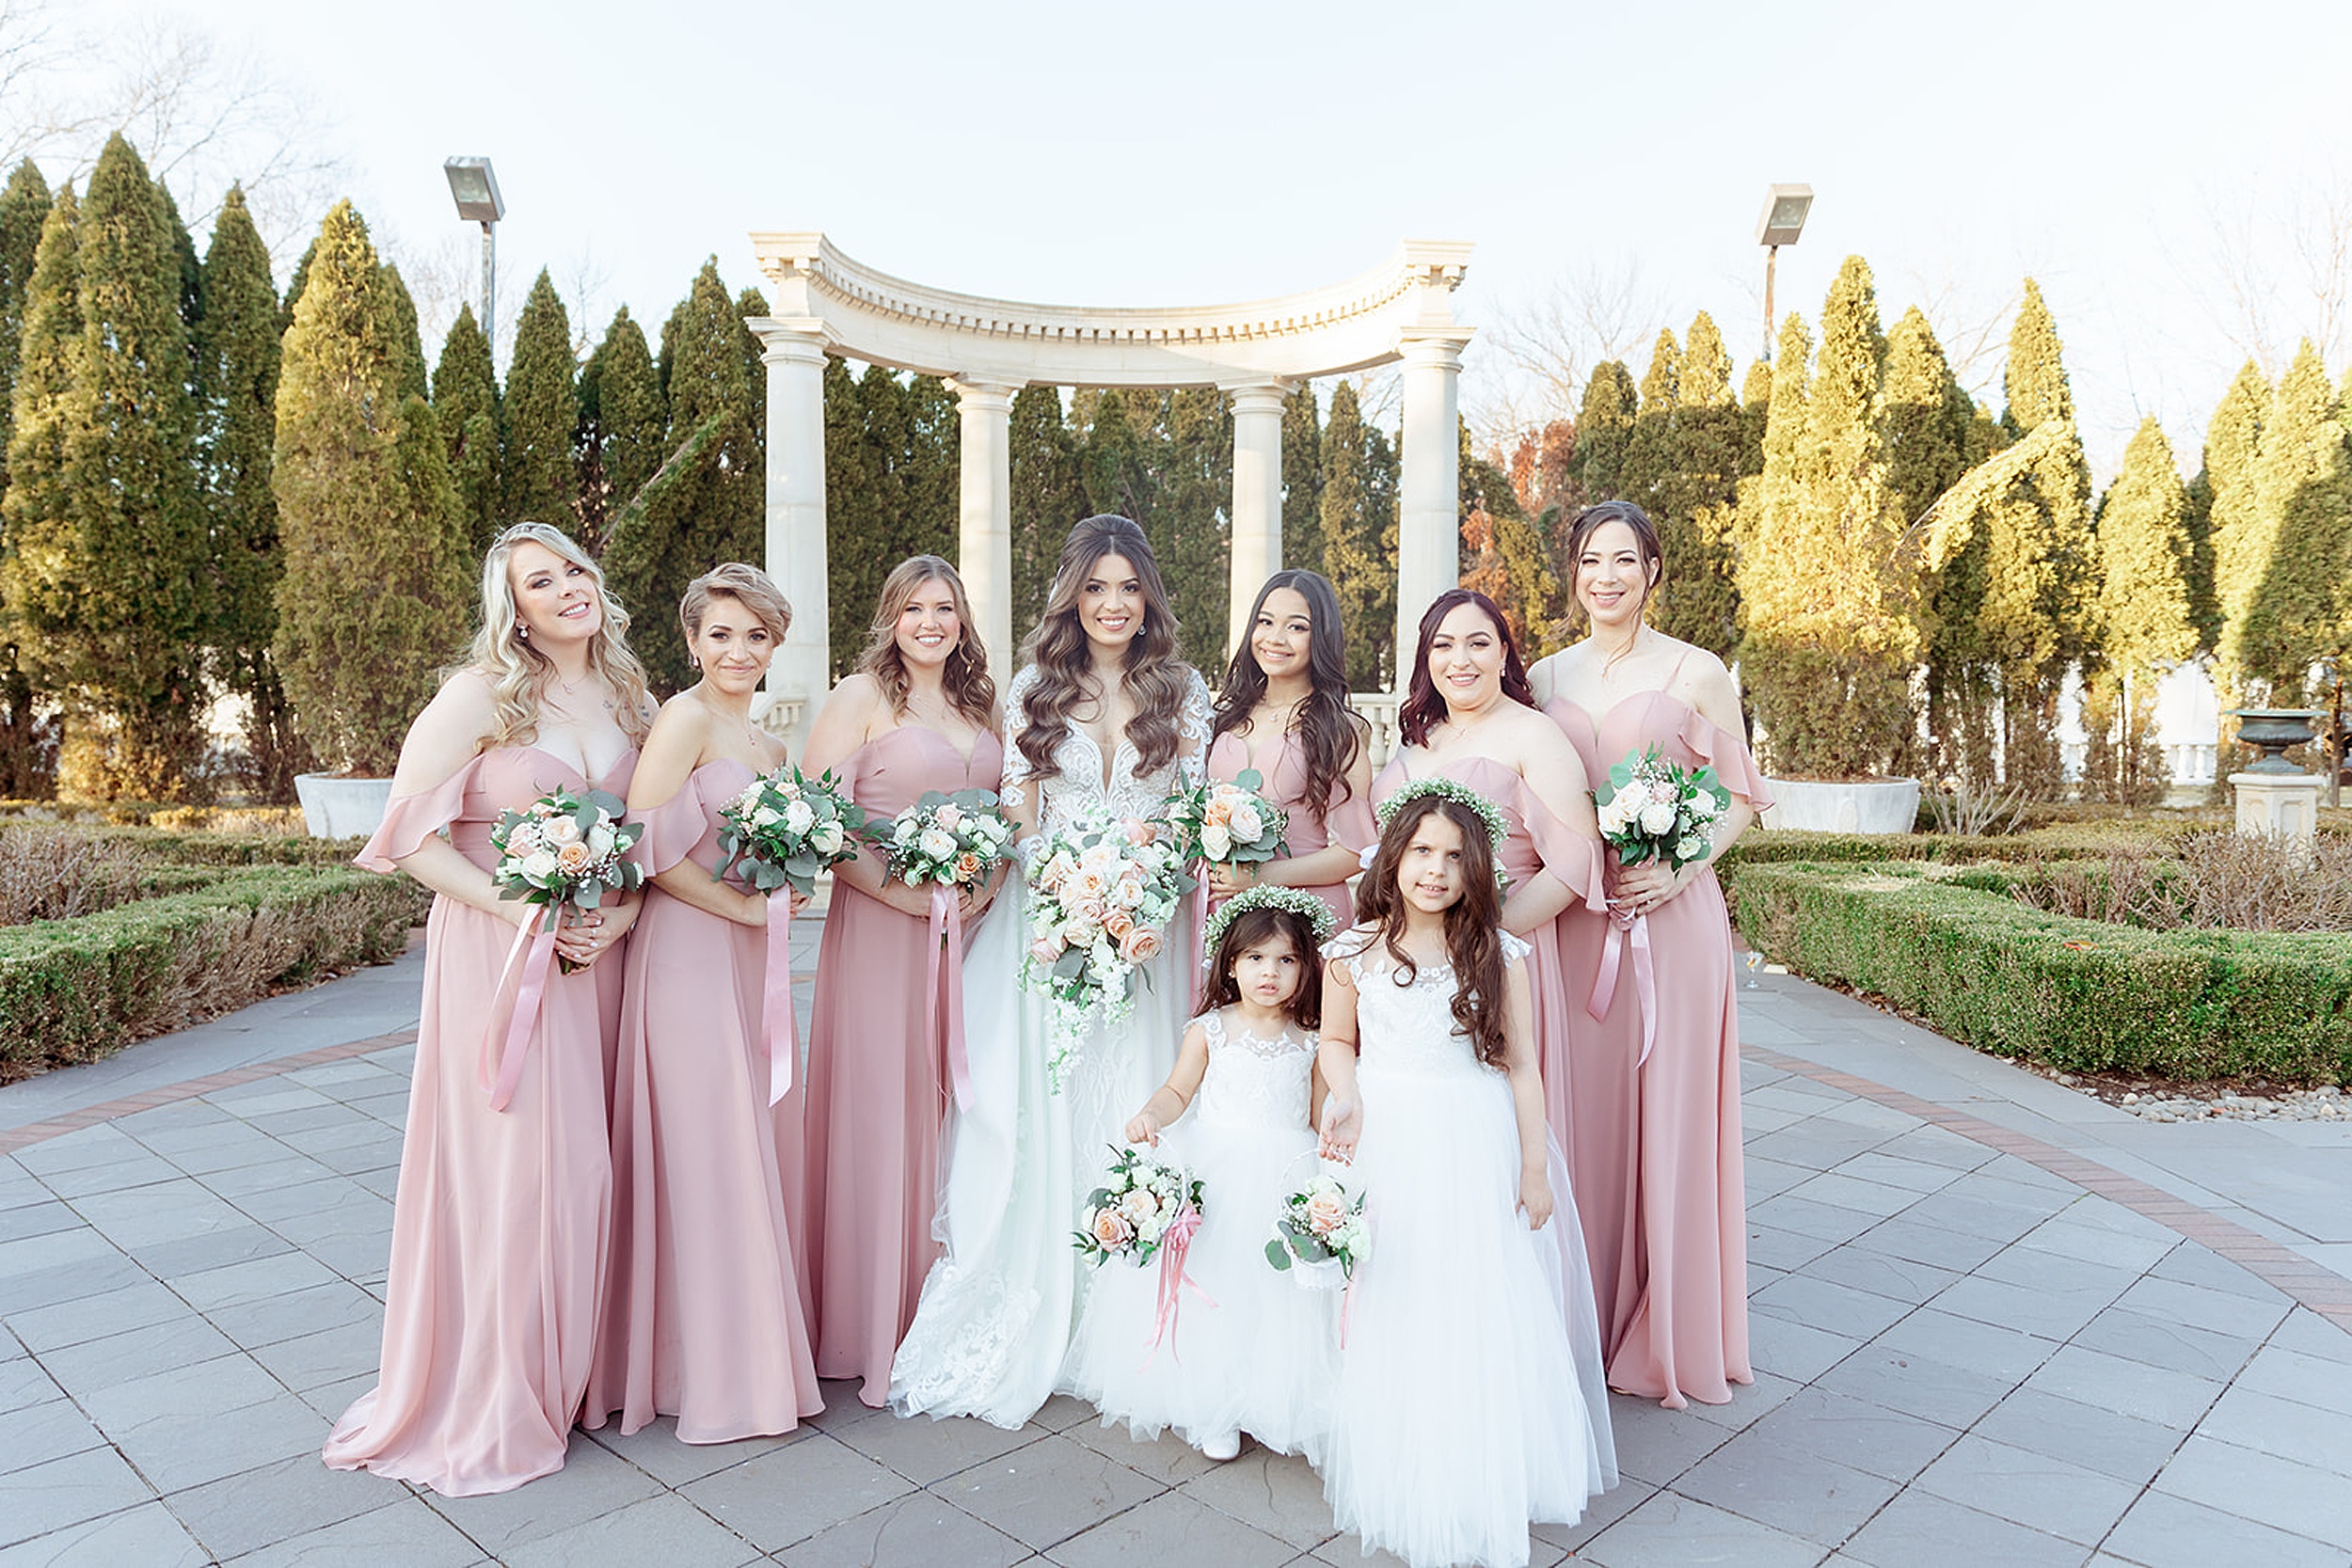 A bride stands with her bridal party and flower girls in a garden patio holding their bouquets